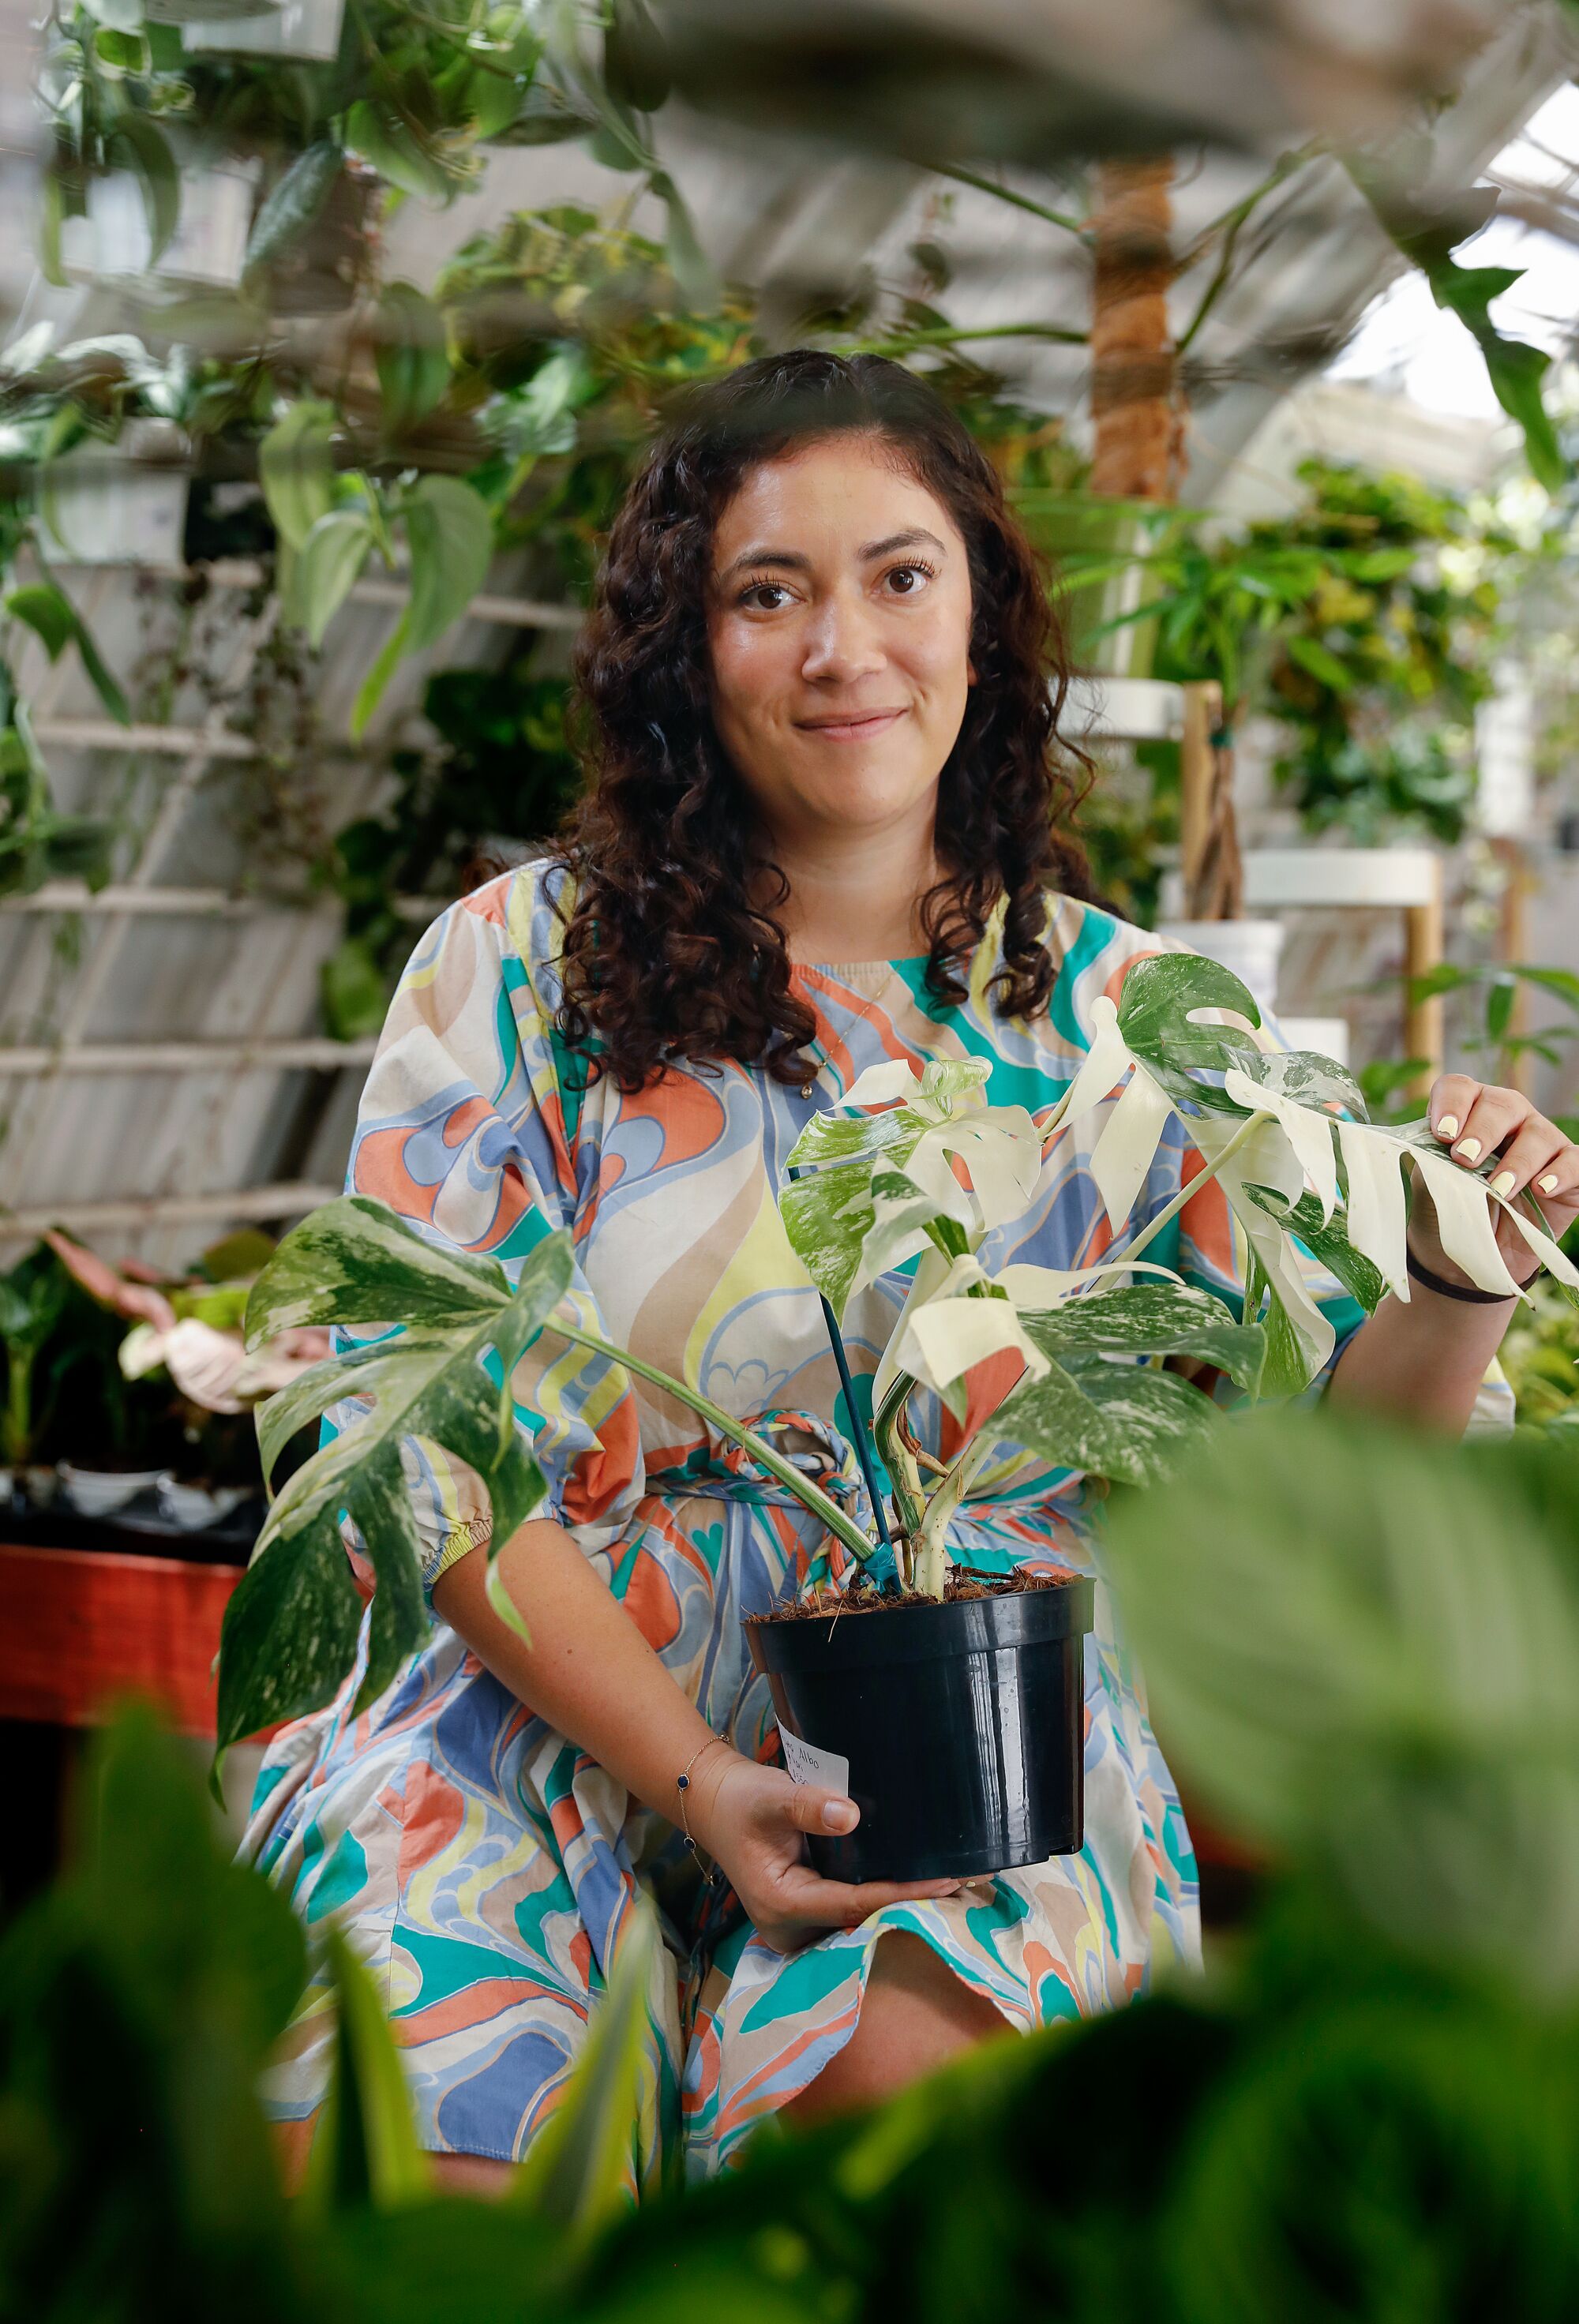 A woman stands among plants in a greenhouse-like space